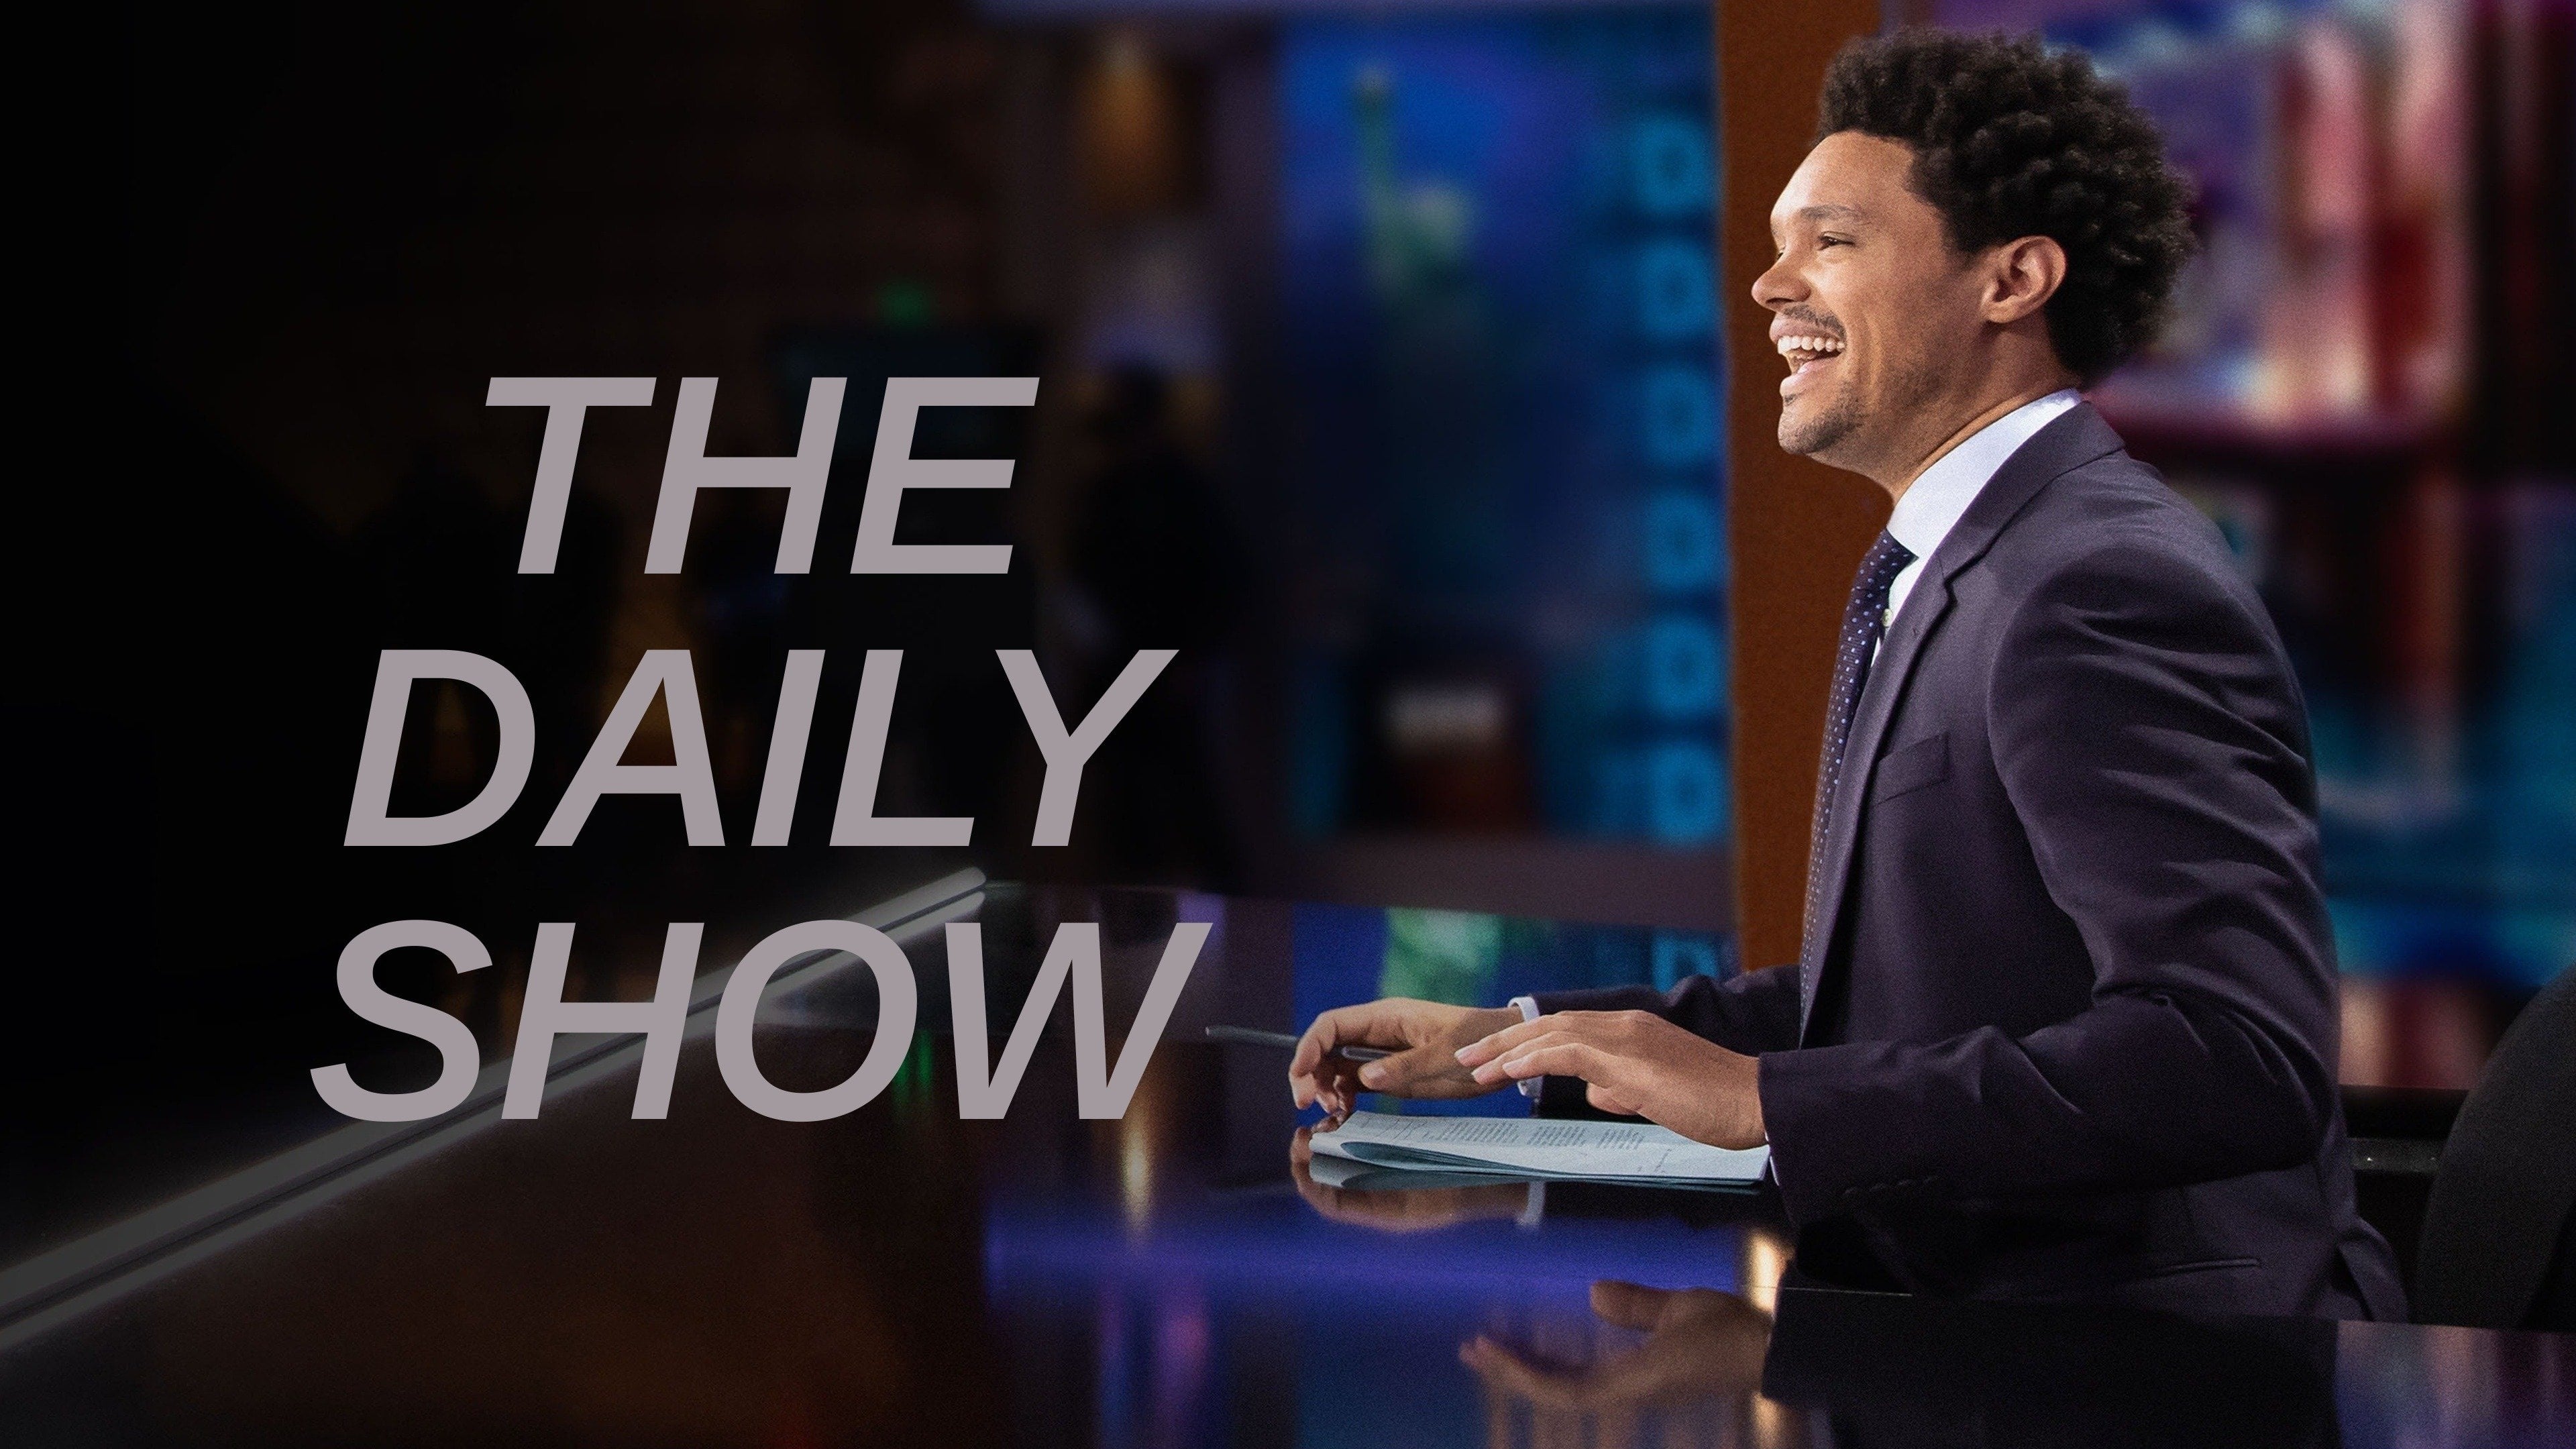 The Daily Show with Trevor Noah - Season 10 Episode 33 : Bruce Willis